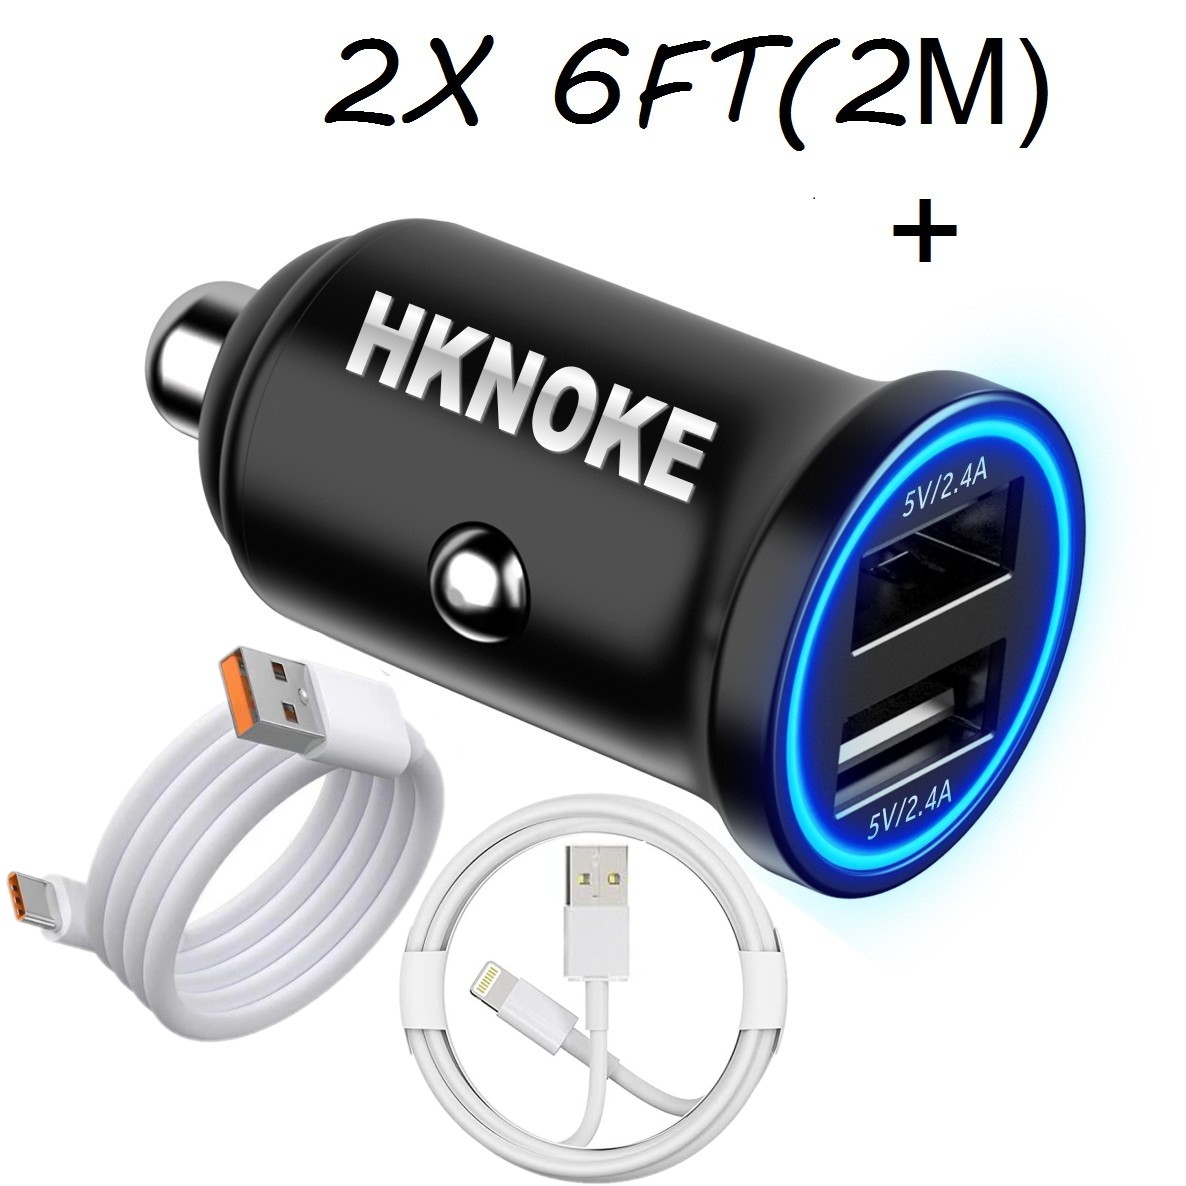 HKNOKE full 4.8 High quality car Charger Cigarette real Quick Socket Adapter Car Charger with 2 M 6 ft cable for android phone iphone